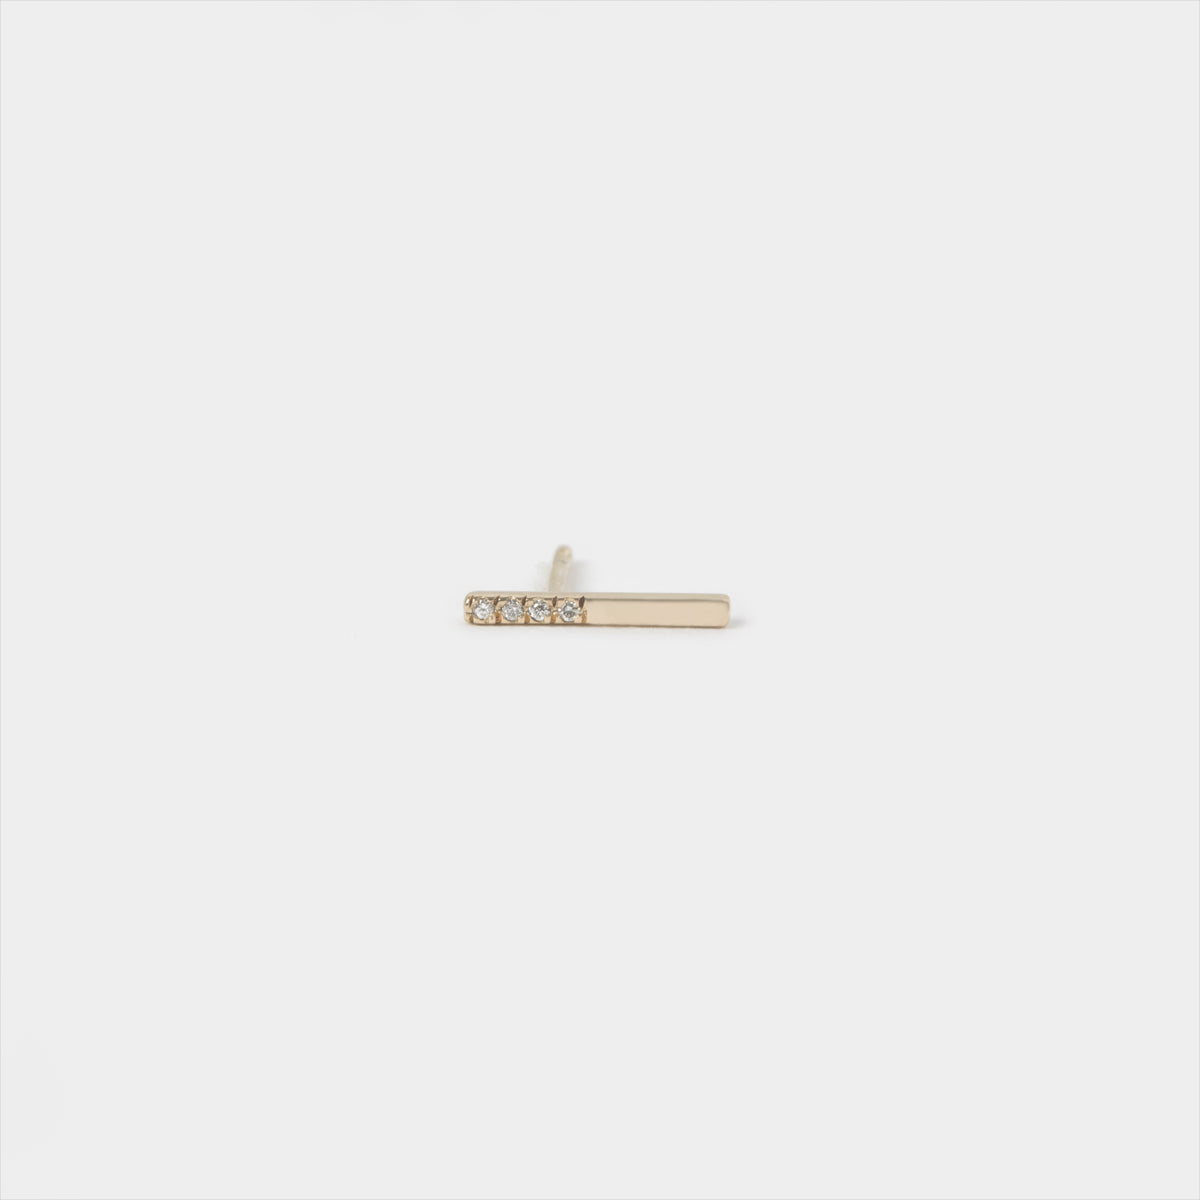 Iva Minimal Studs in 14k Gold set with White Diamonds By SHW Fine Jewelry NYC